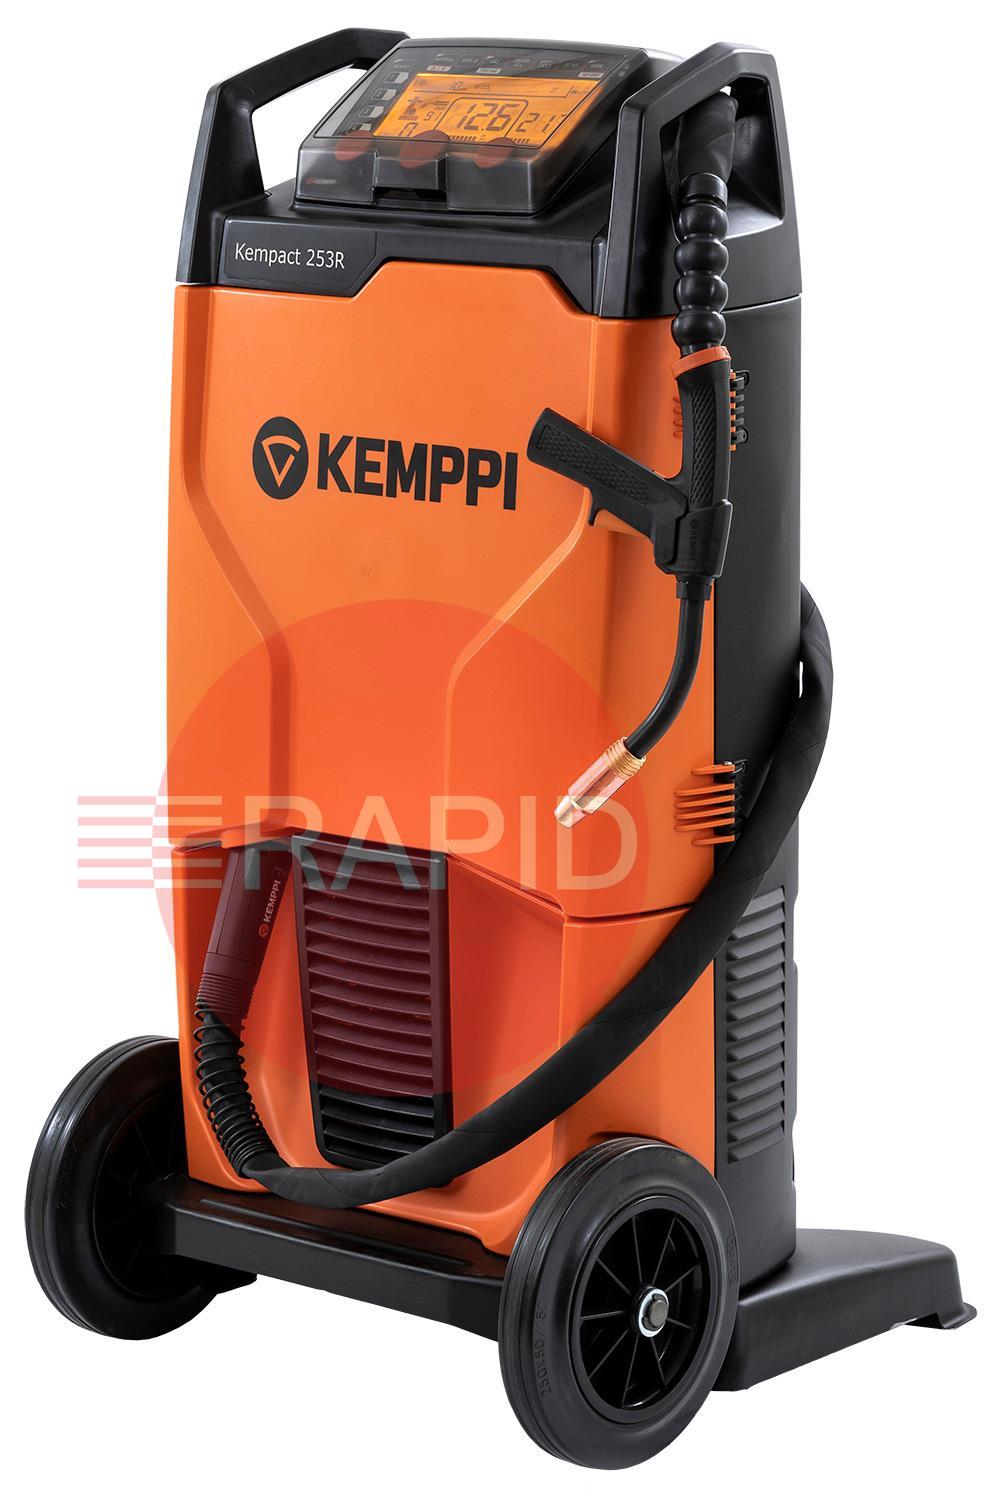 P2269GXE  Kemppi Kempact RA 253R, 250A 3 Phase 400v Mig Welder, with Flexlite GXe 205G 3.5m Torch